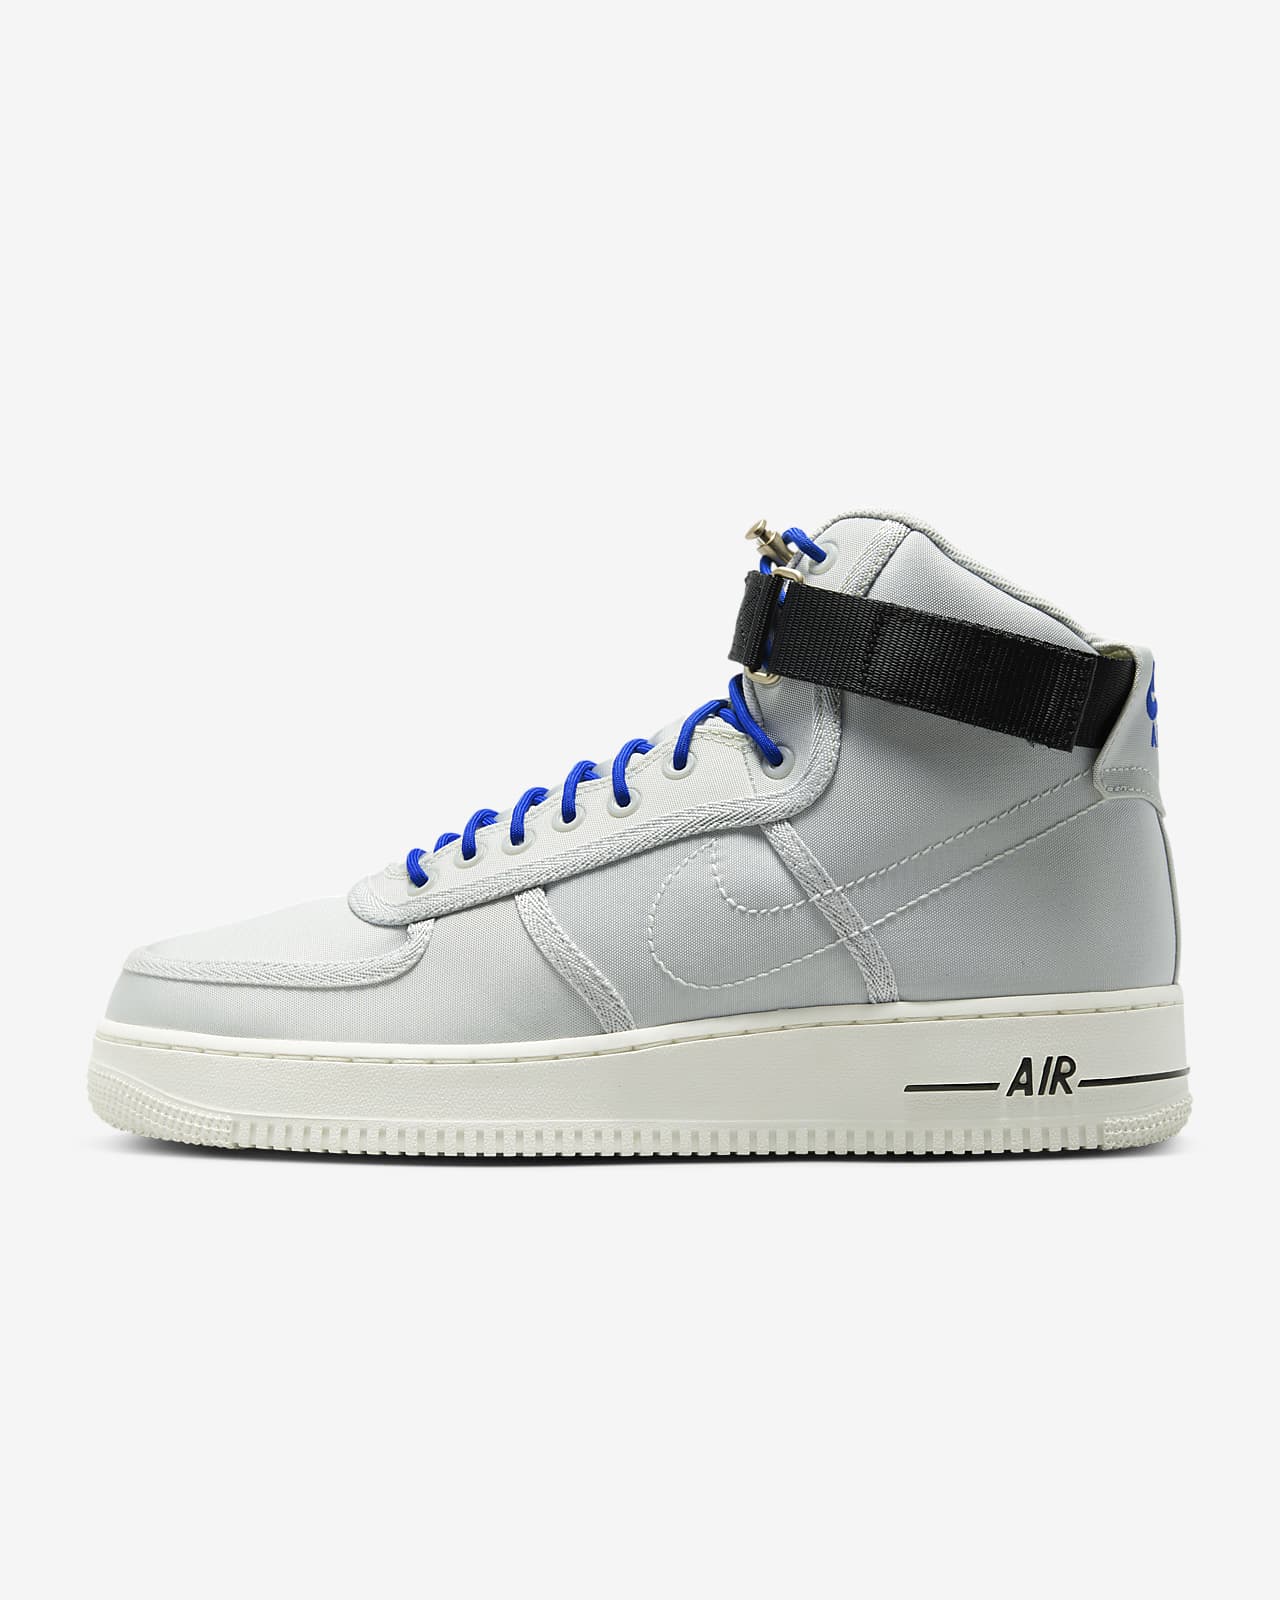 Nike Air Force 1 High 07 LV8 Mens Shoes Review